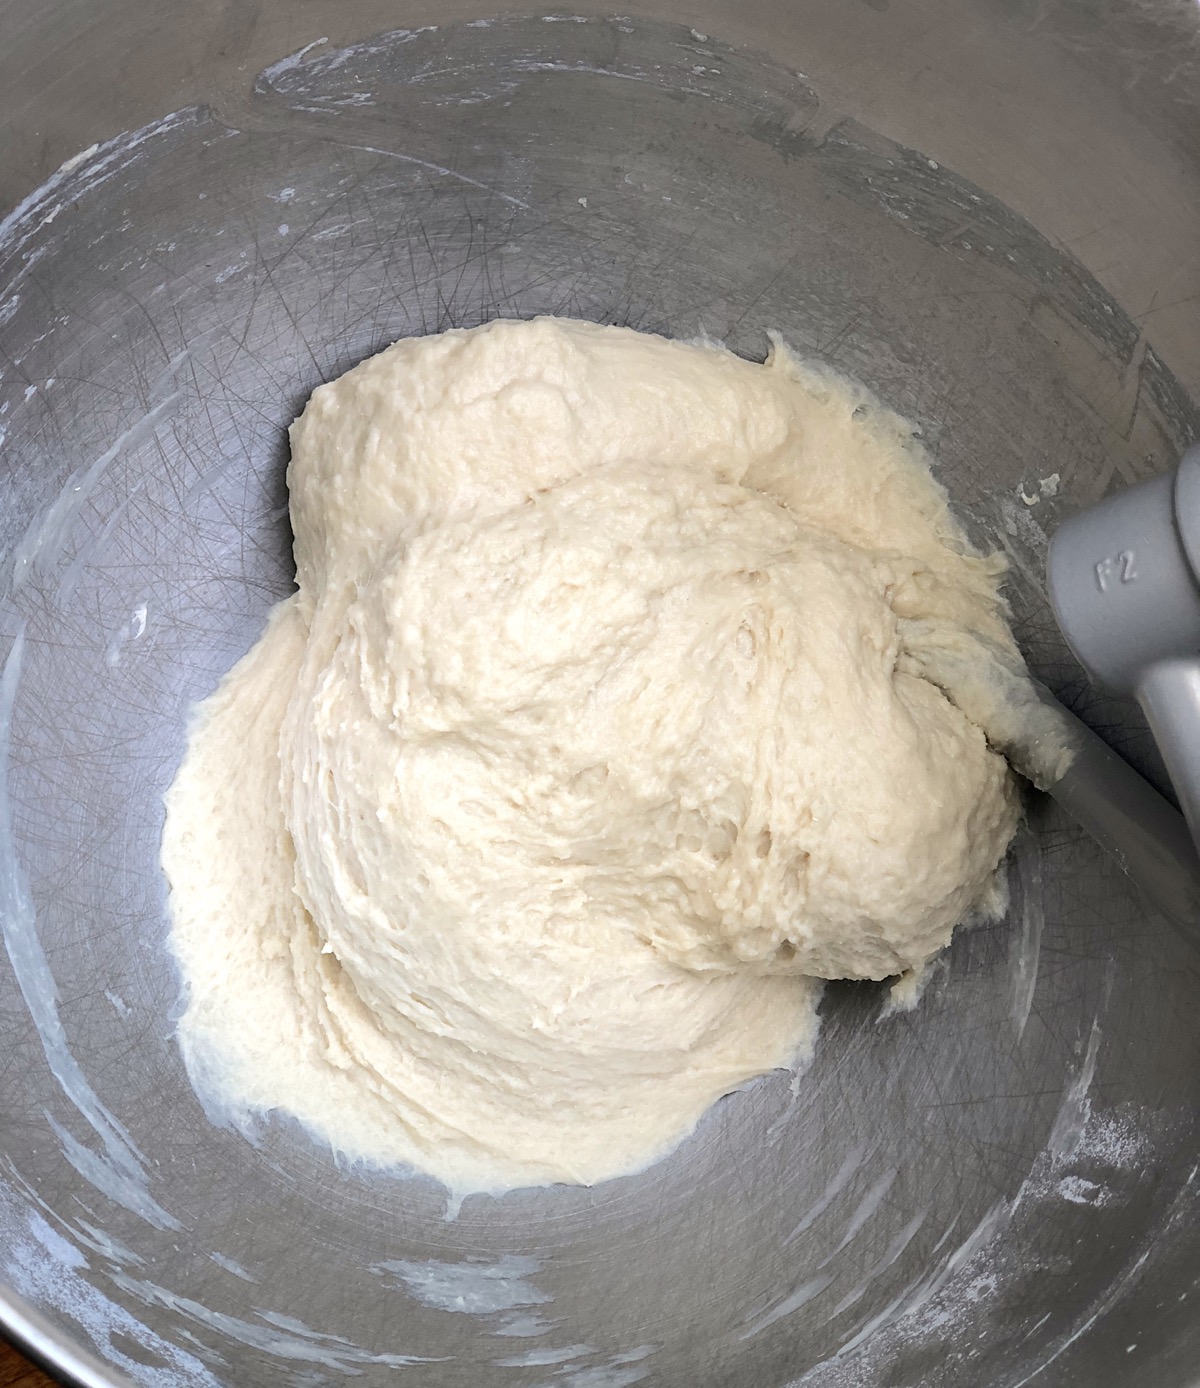 Sticky kneaded yeast dough in the bowl of a stand mixer.